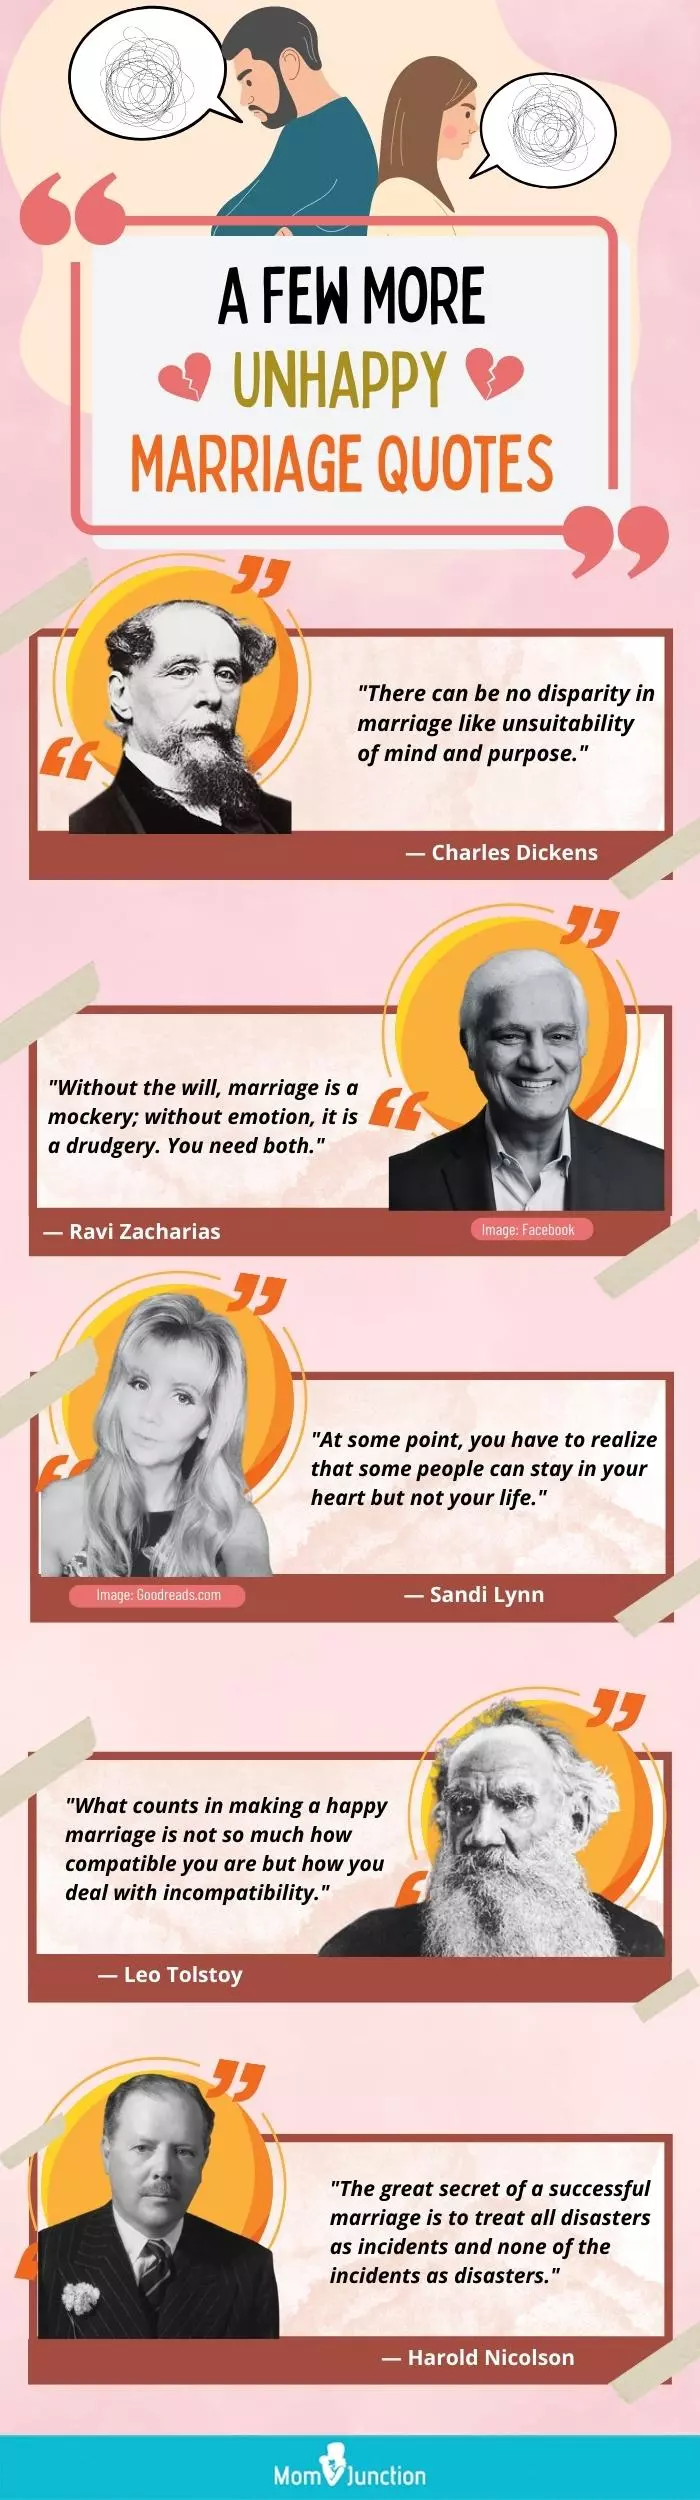 unhappy marriage quotes (infographic)